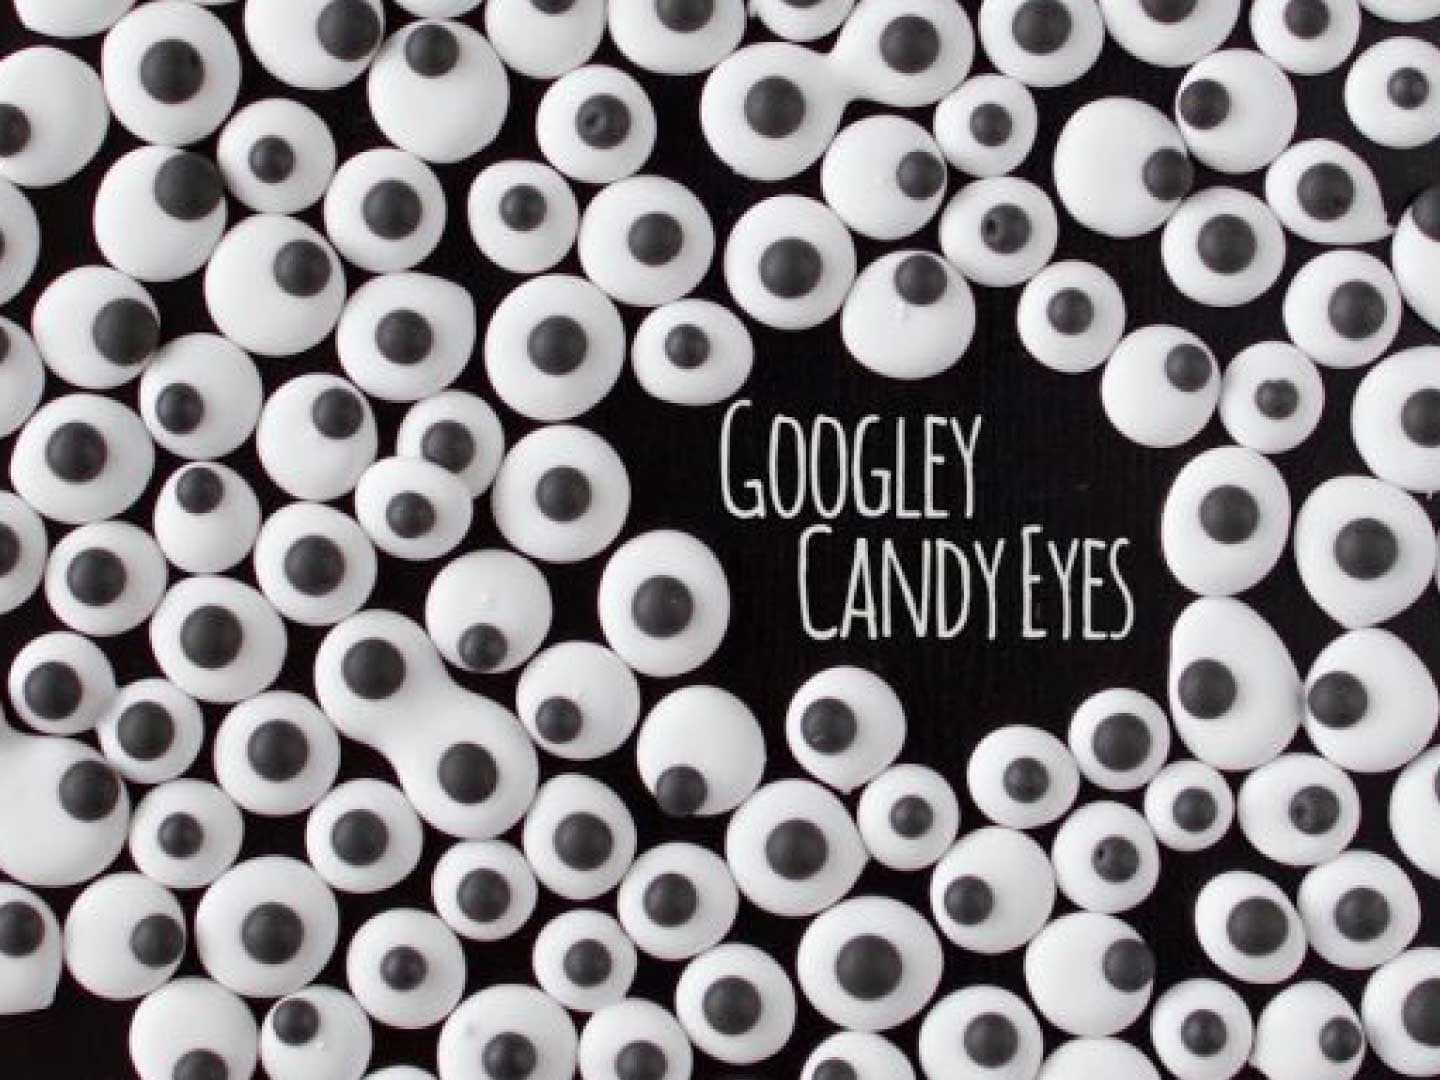 How to Make Candy Googly Eyes - Self Proclaimed Foodie